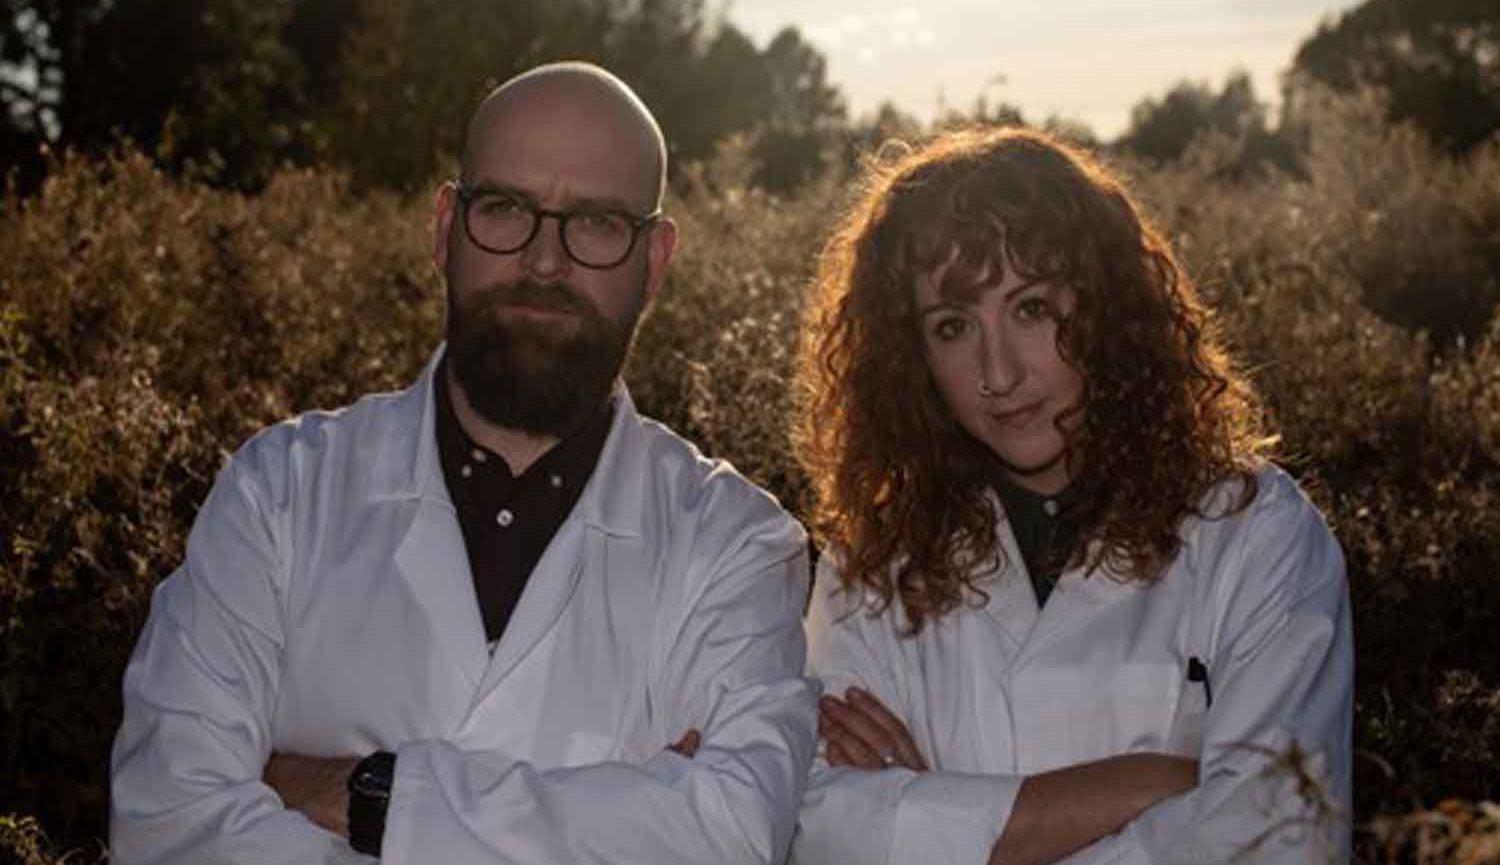 Findlay Napier and Megan Henwood standing side by side wearing white lab coats